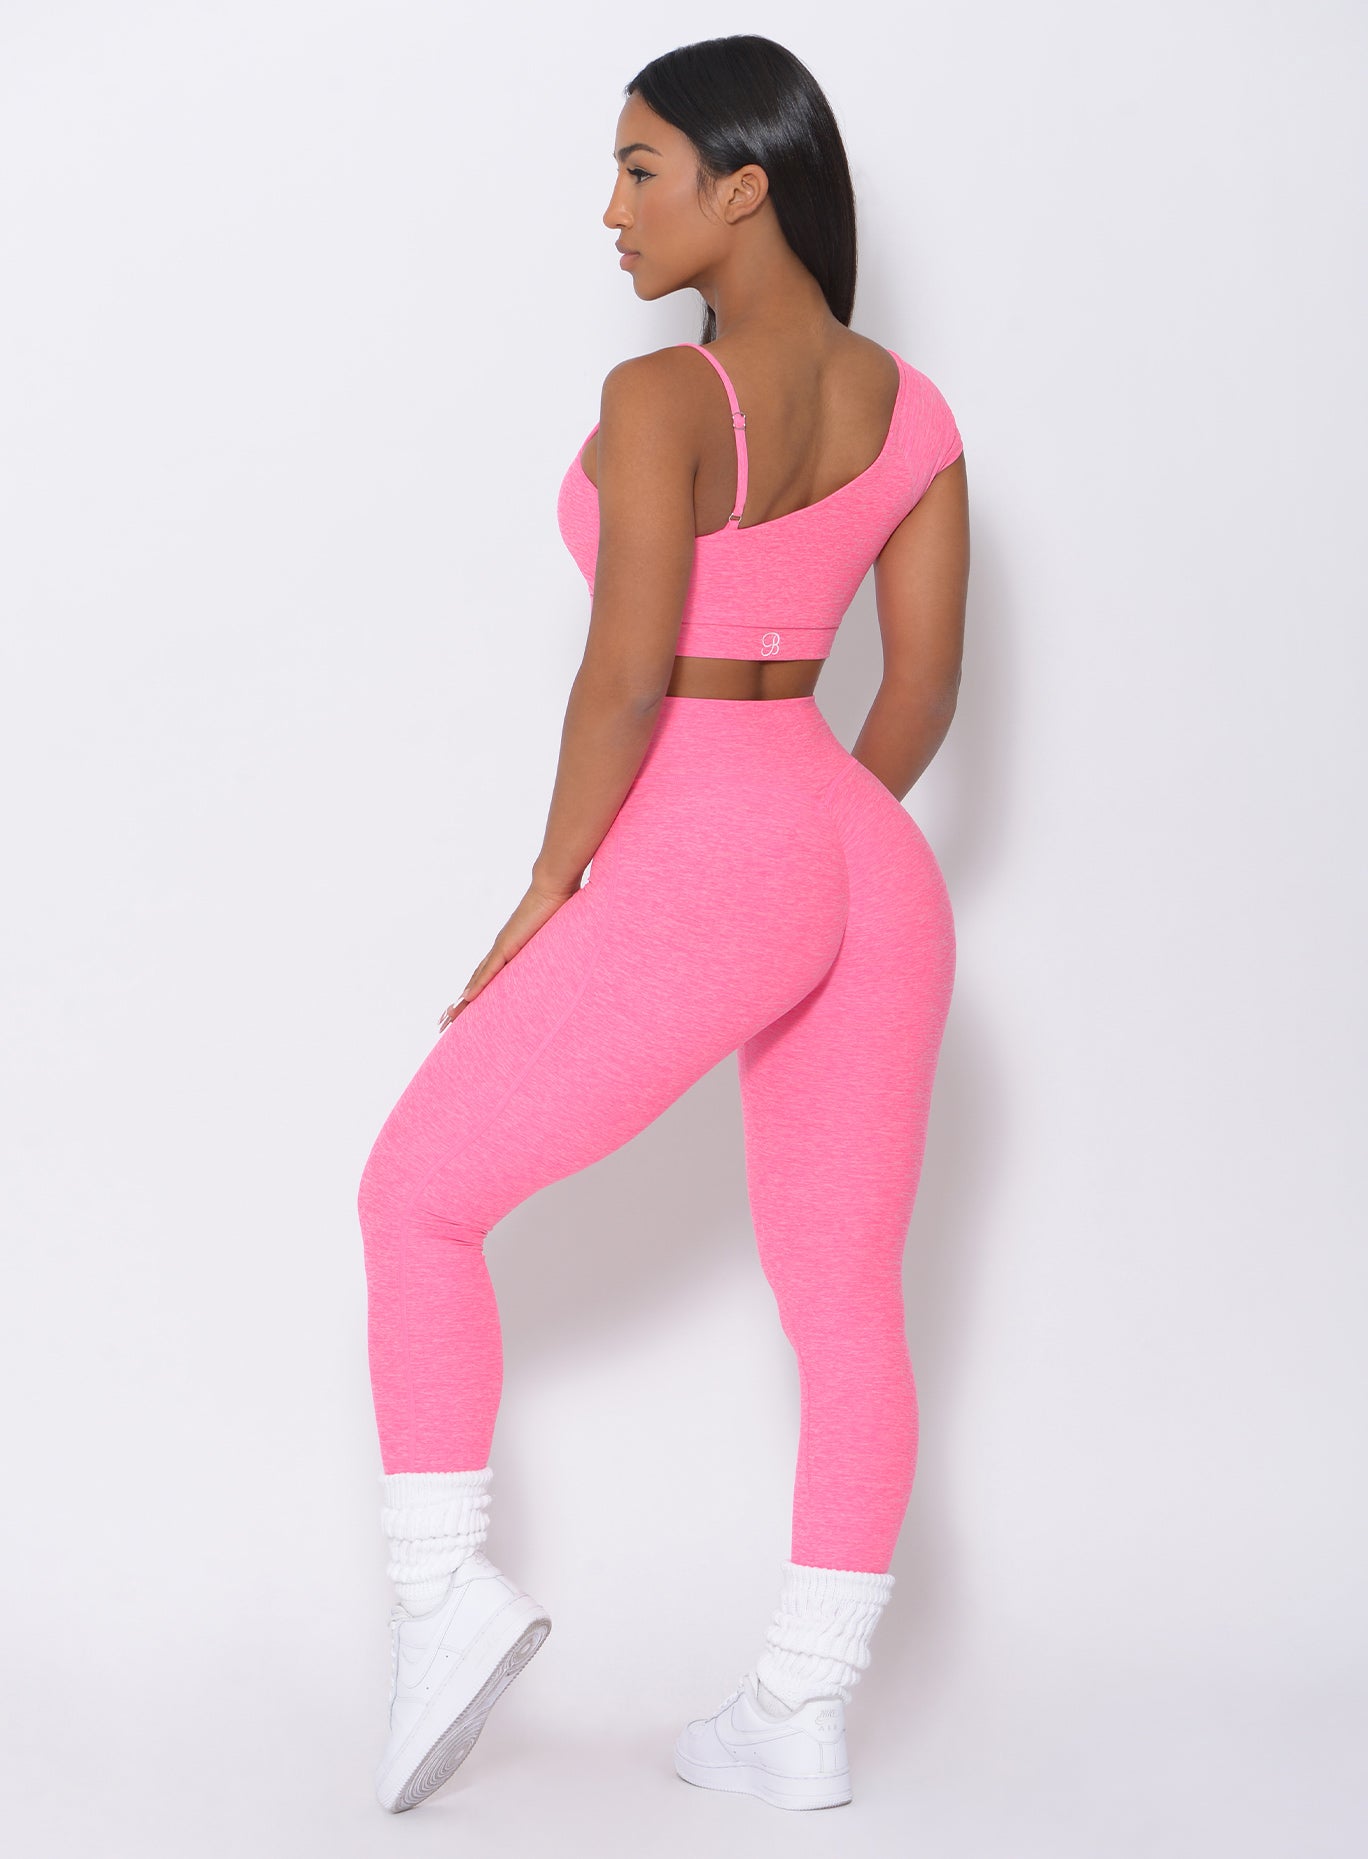 Back view of the model in our pink fit leggings and a matching top